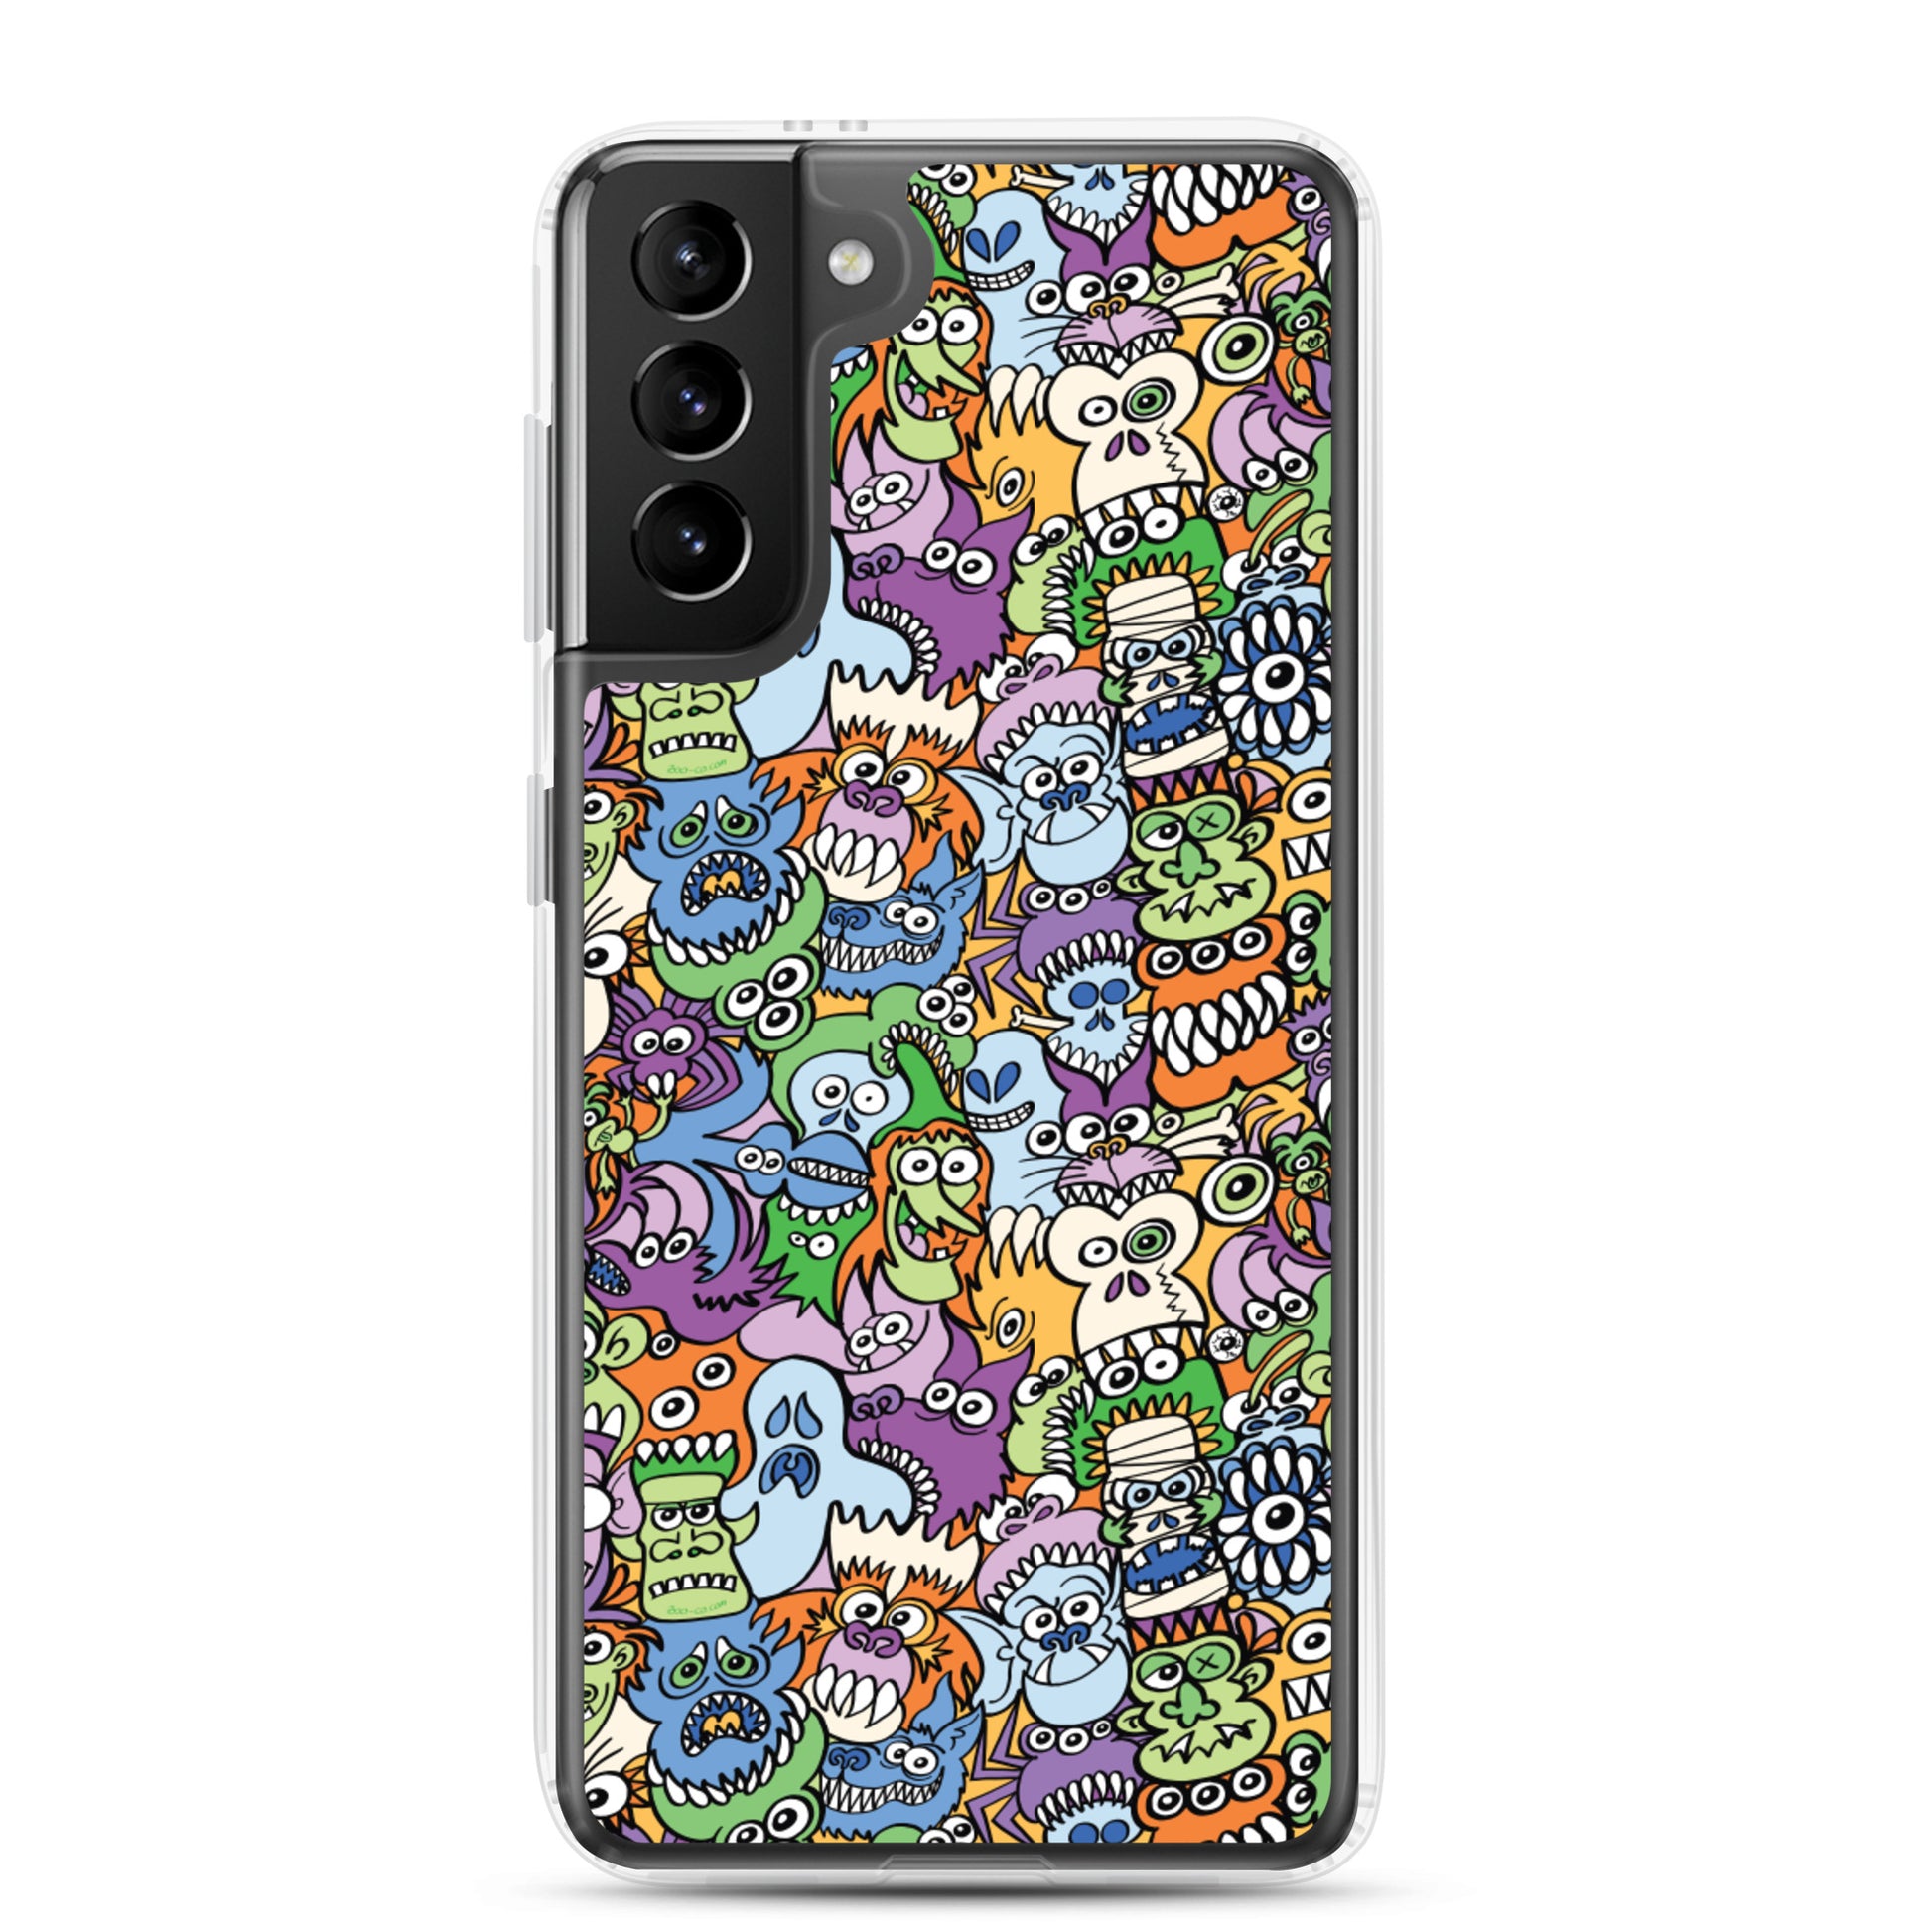 All the spooky Halloween monsters in a pattern design Samsung Case. s21 plus